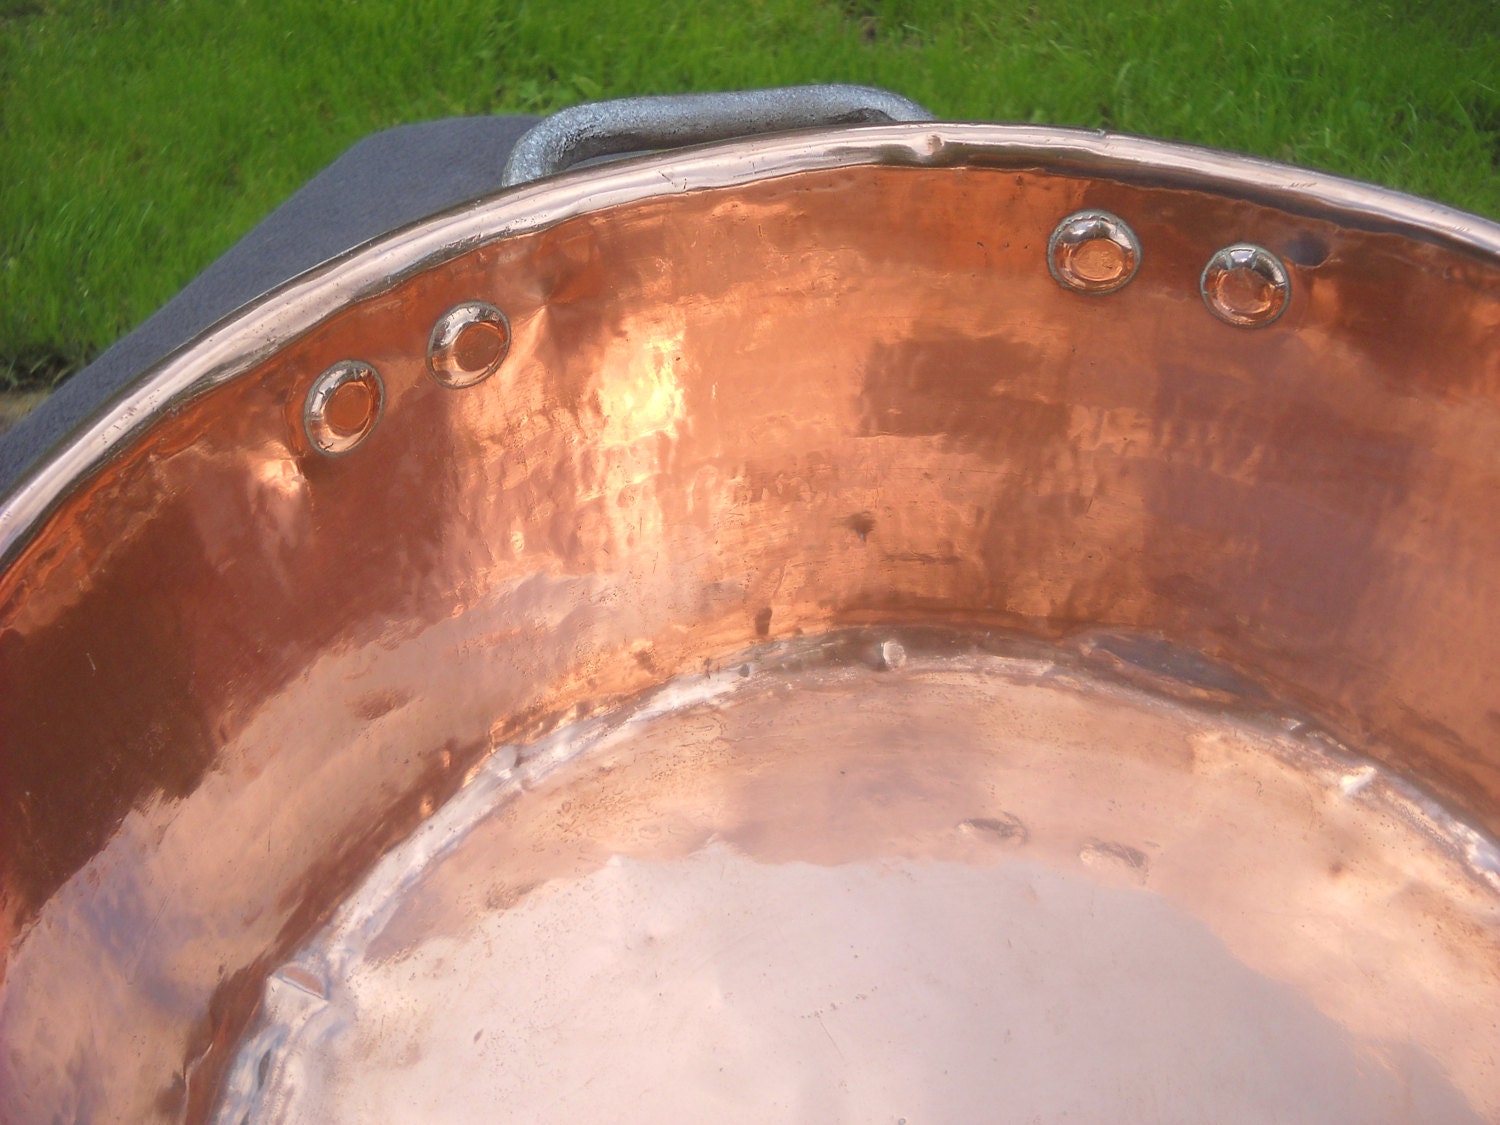 Exceptional Patina on this lovely old confiture pan